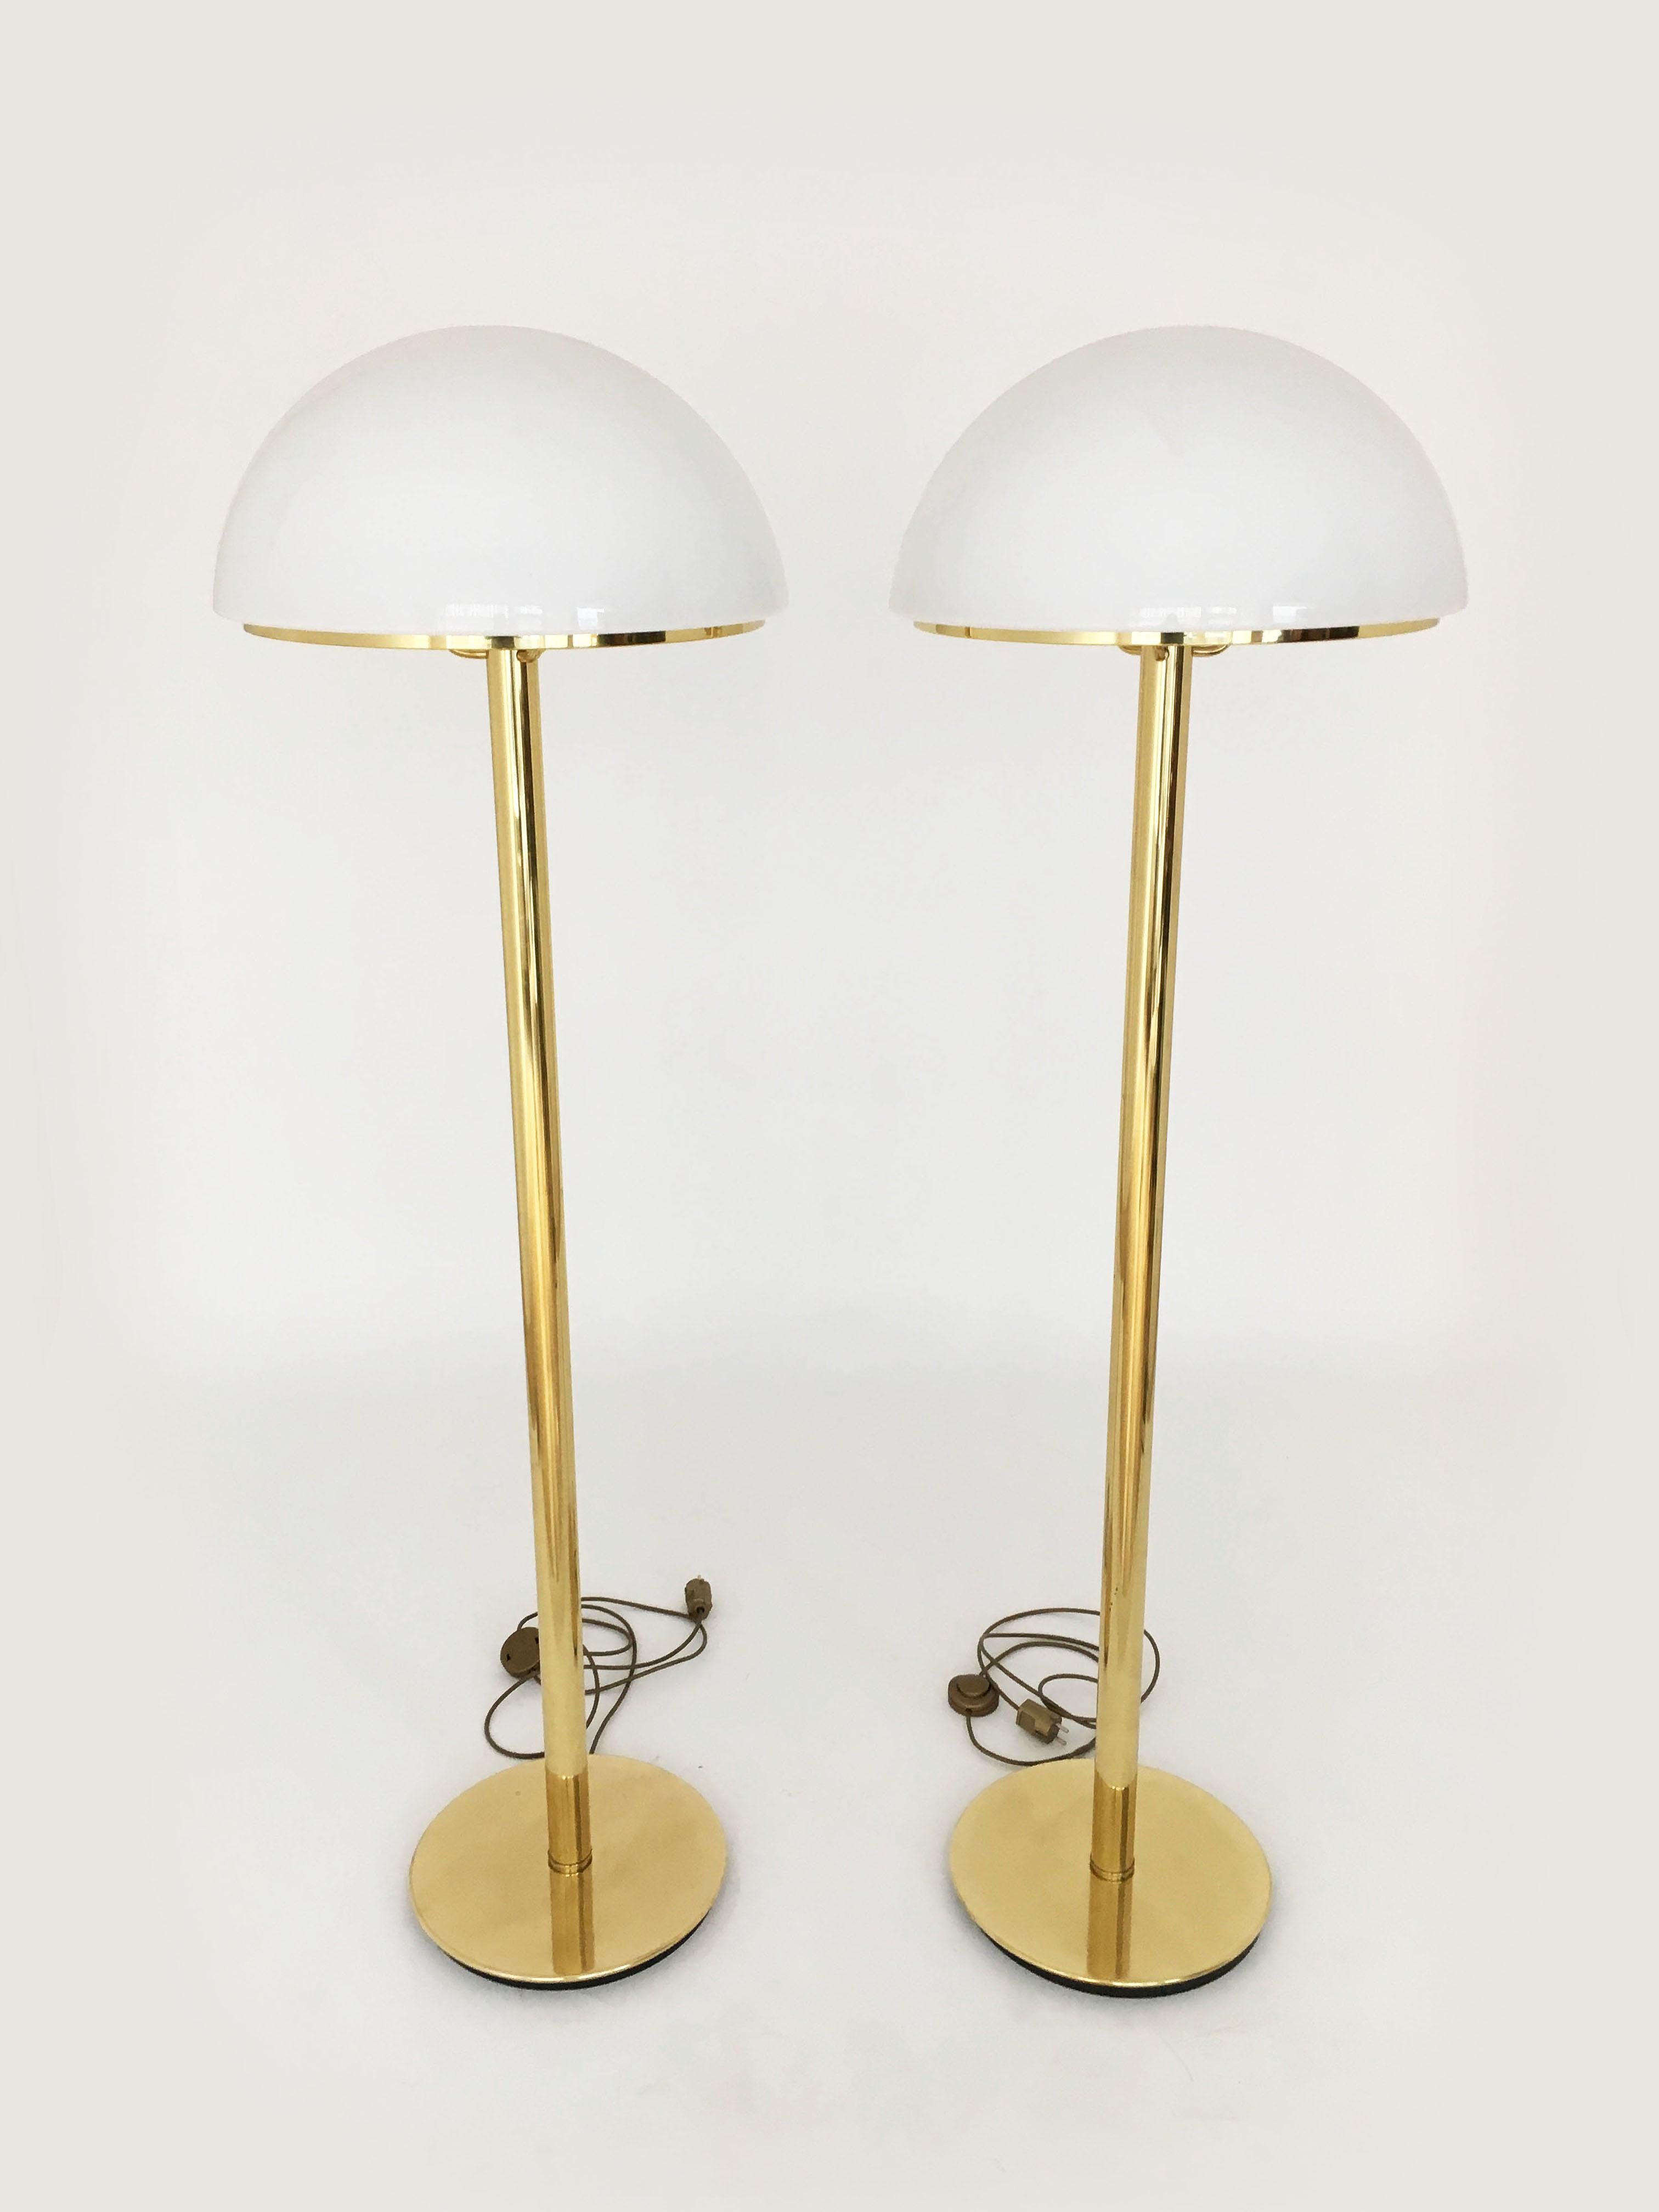 Limburg Mushroom Pair Floor Lamps Brass Satin Glass, Germany, 1970s In Good Condition For Sale In Vienna, Vienna